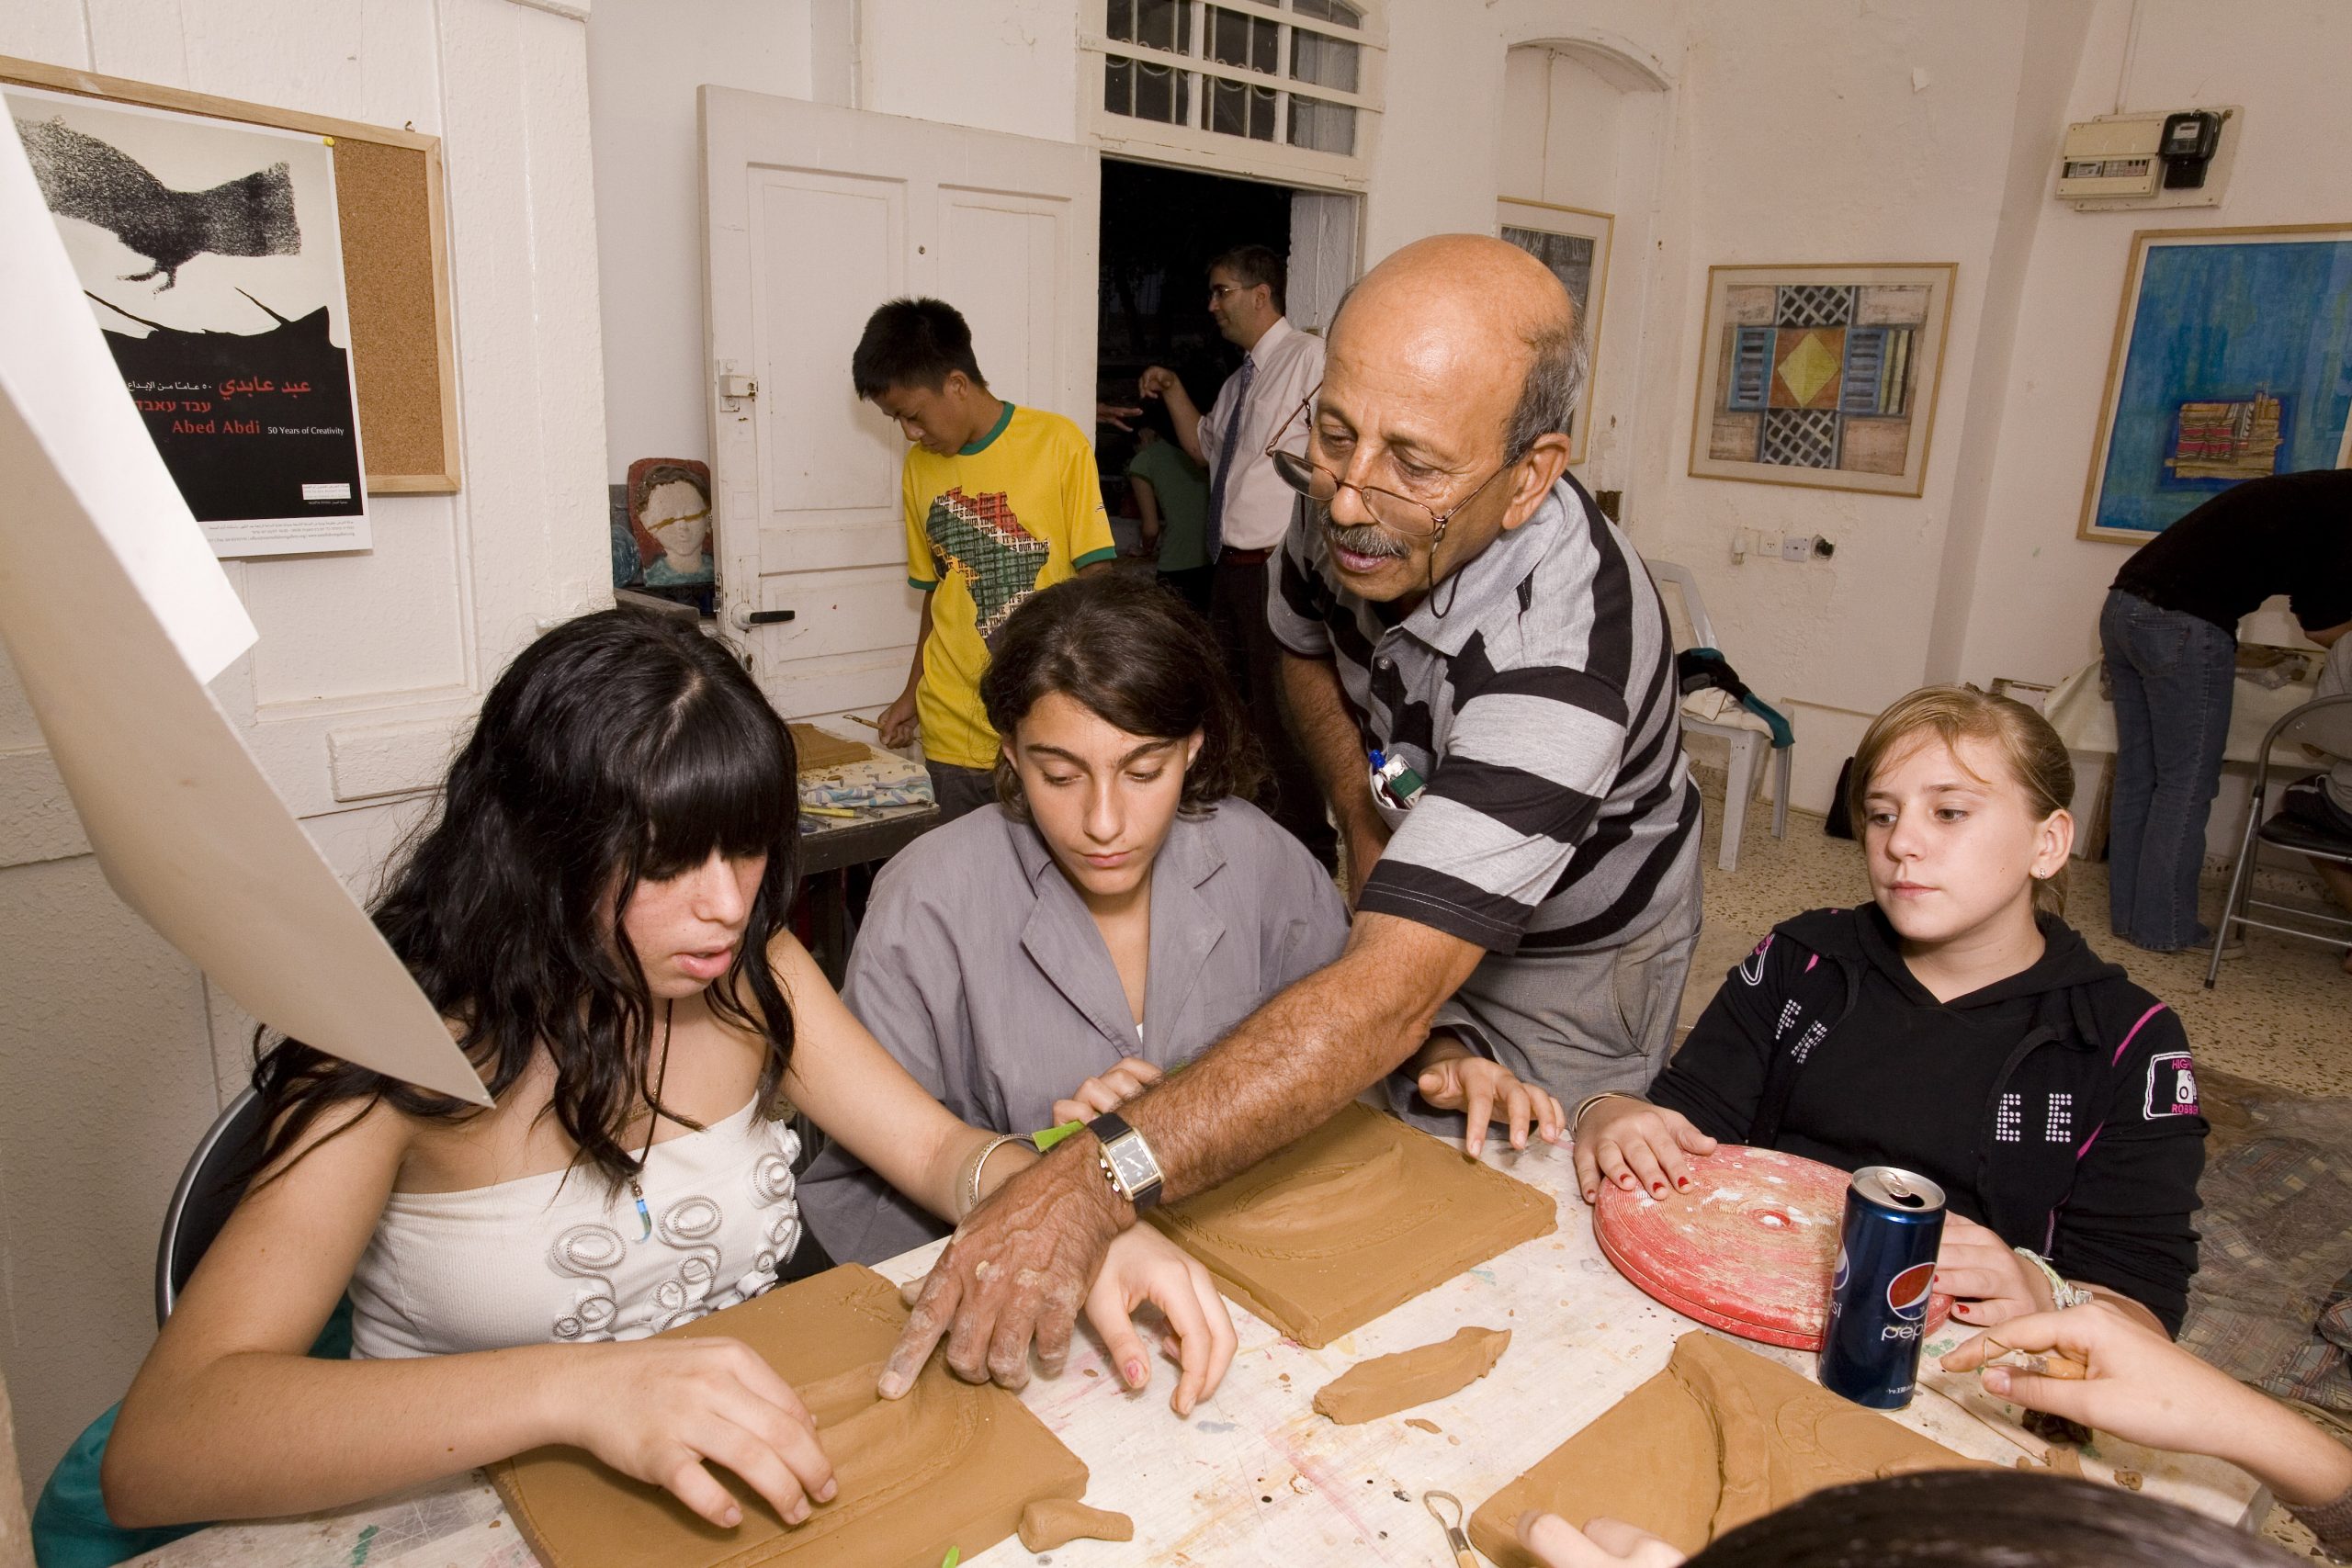 Abed Abdi with his art students, 2010